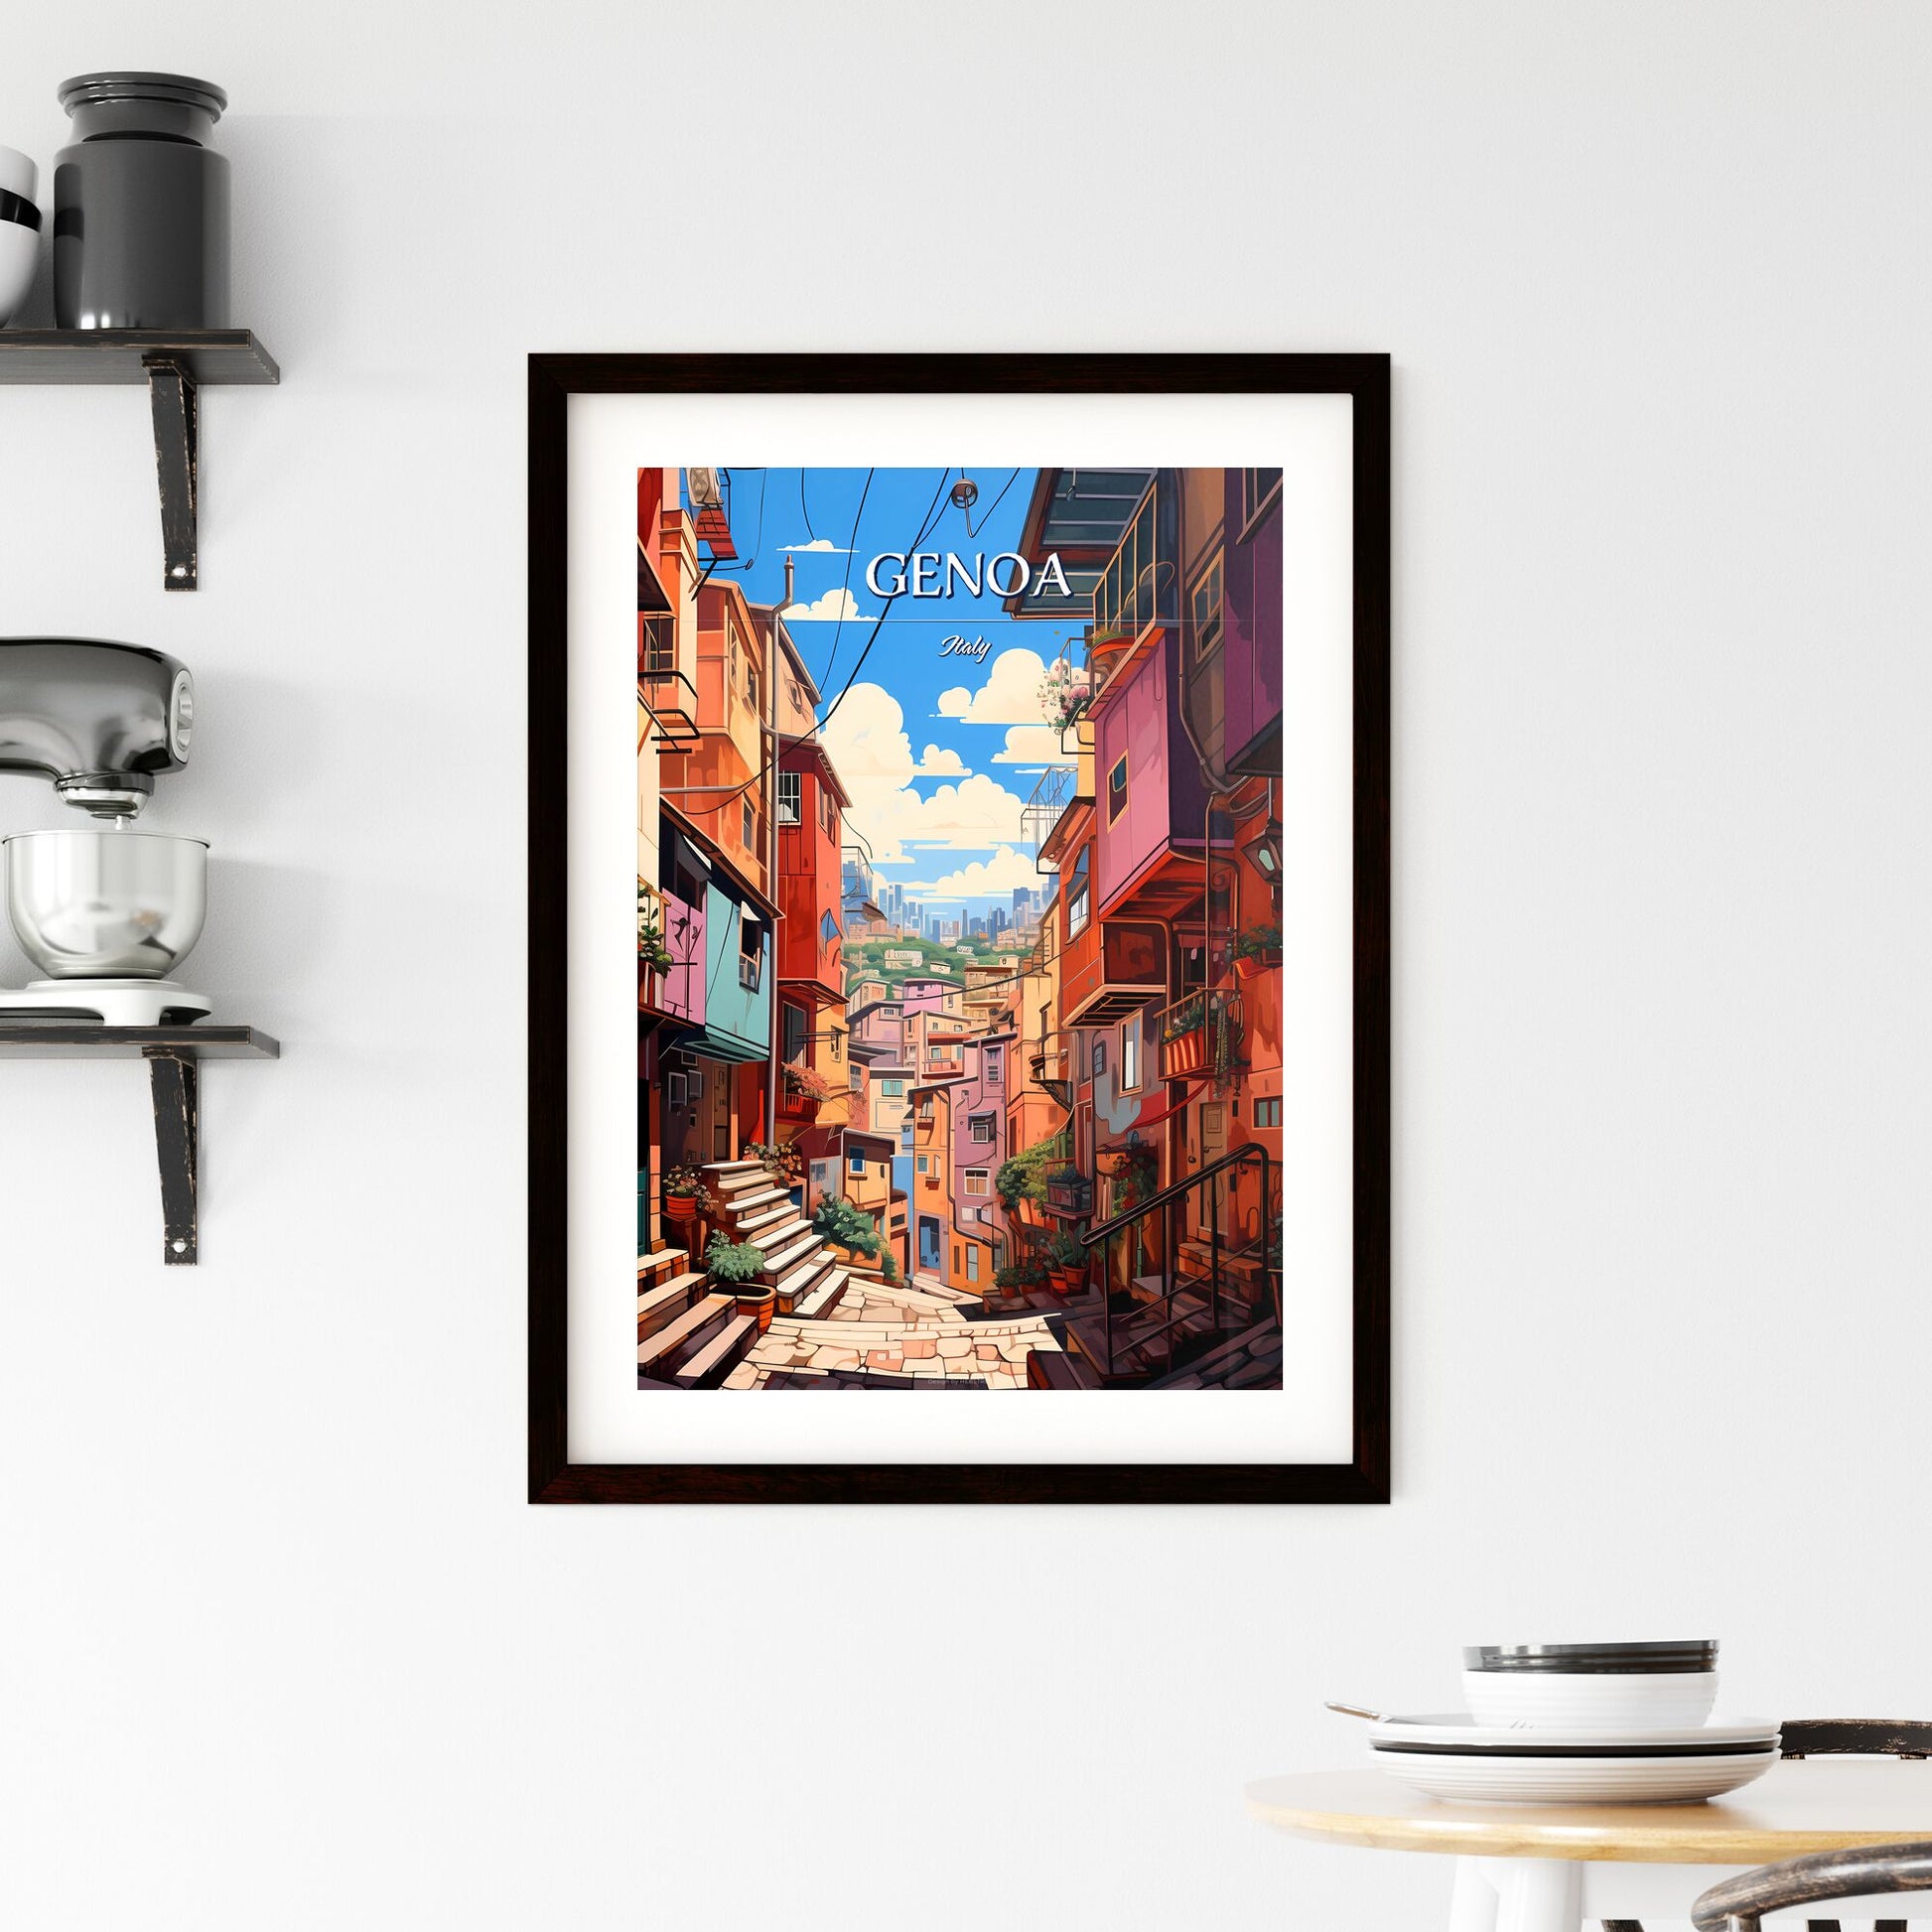 Genoa, Italy - Art print of a colorful buildings in Little Italy Default Title